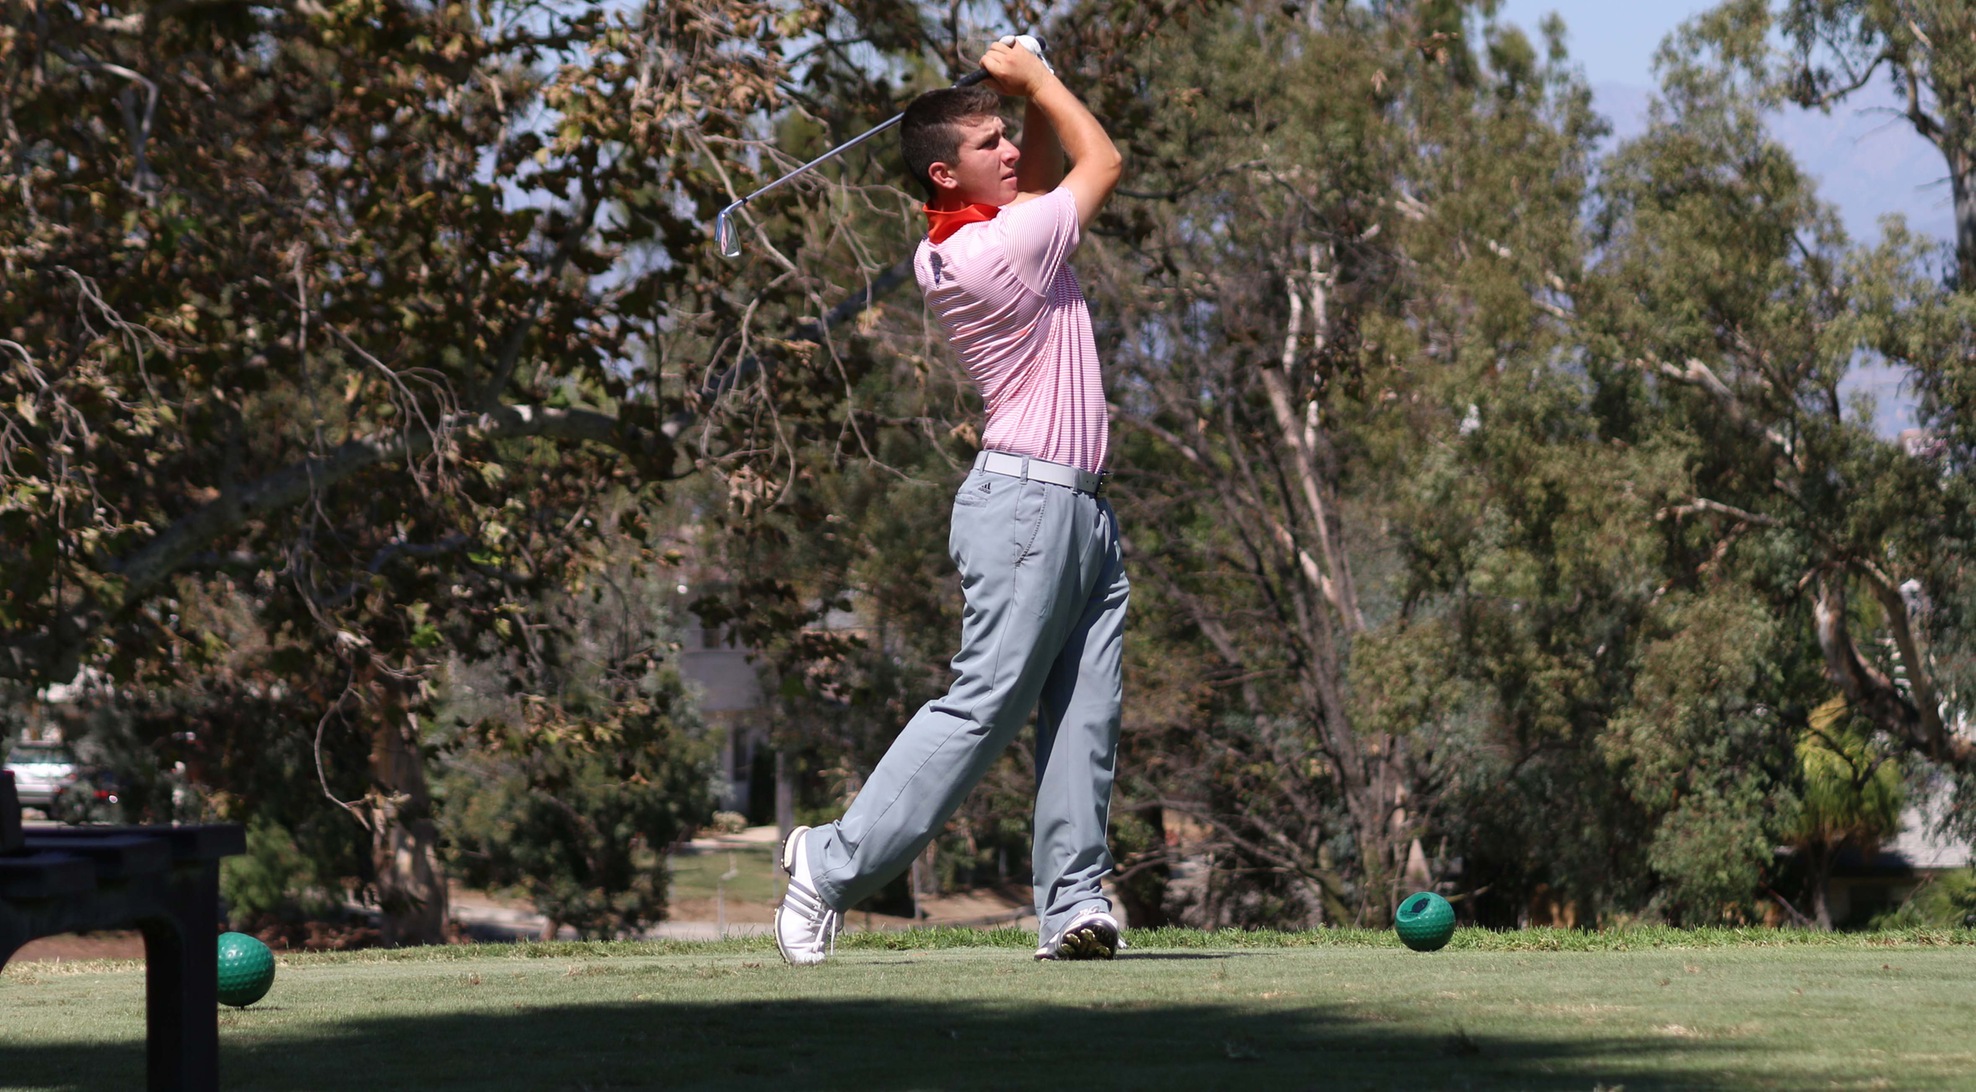 No. 6 Men's Golf wraps up fall season with 5th place finish